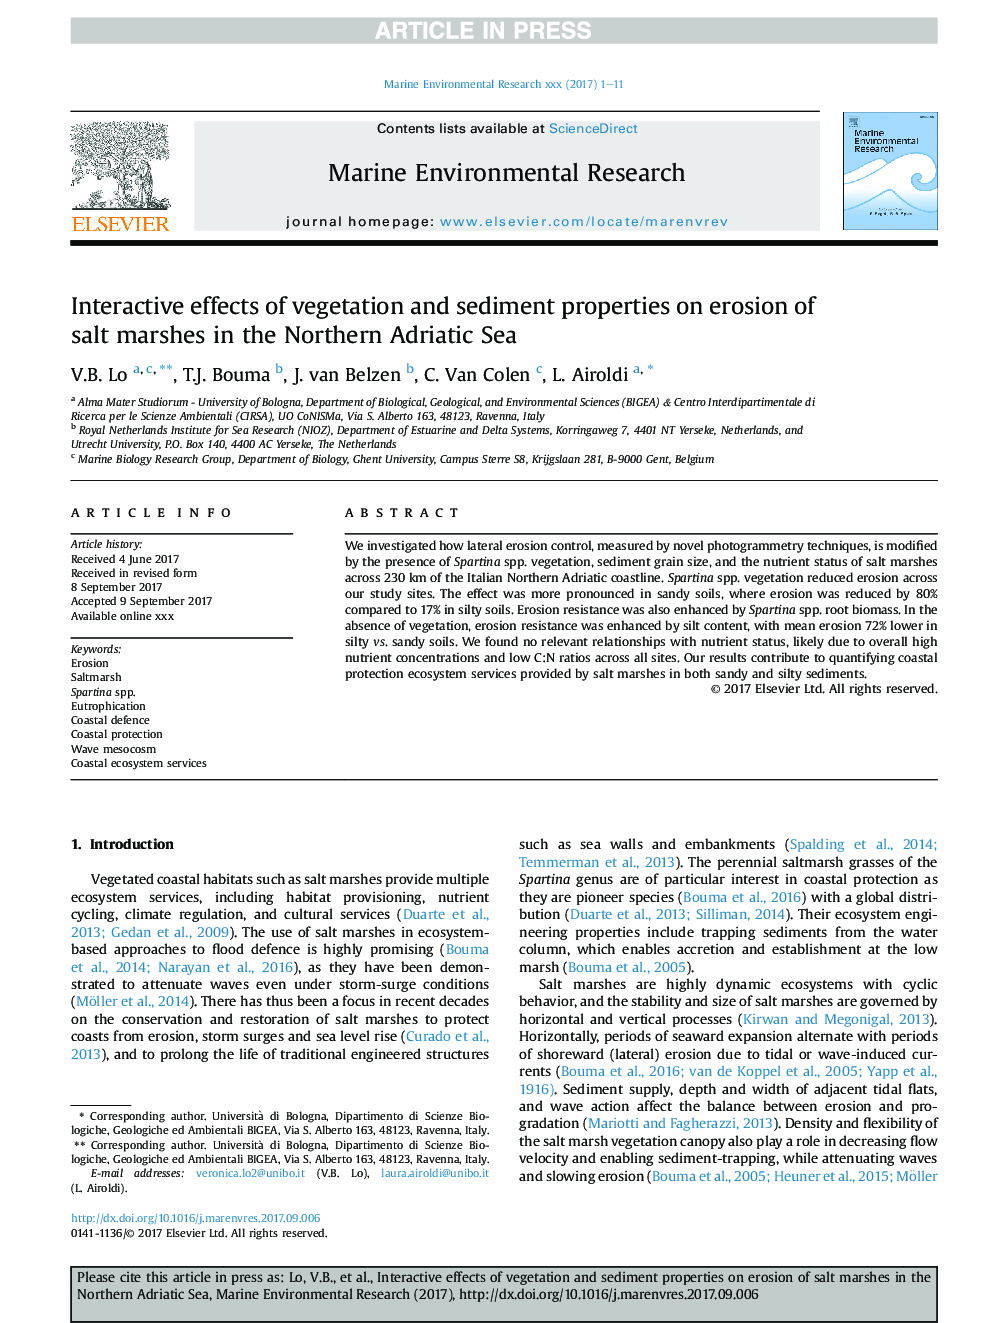 Interactive effects of vegetation and sediment properties on erosion of salt marshes in the Northern Adriatic Sea